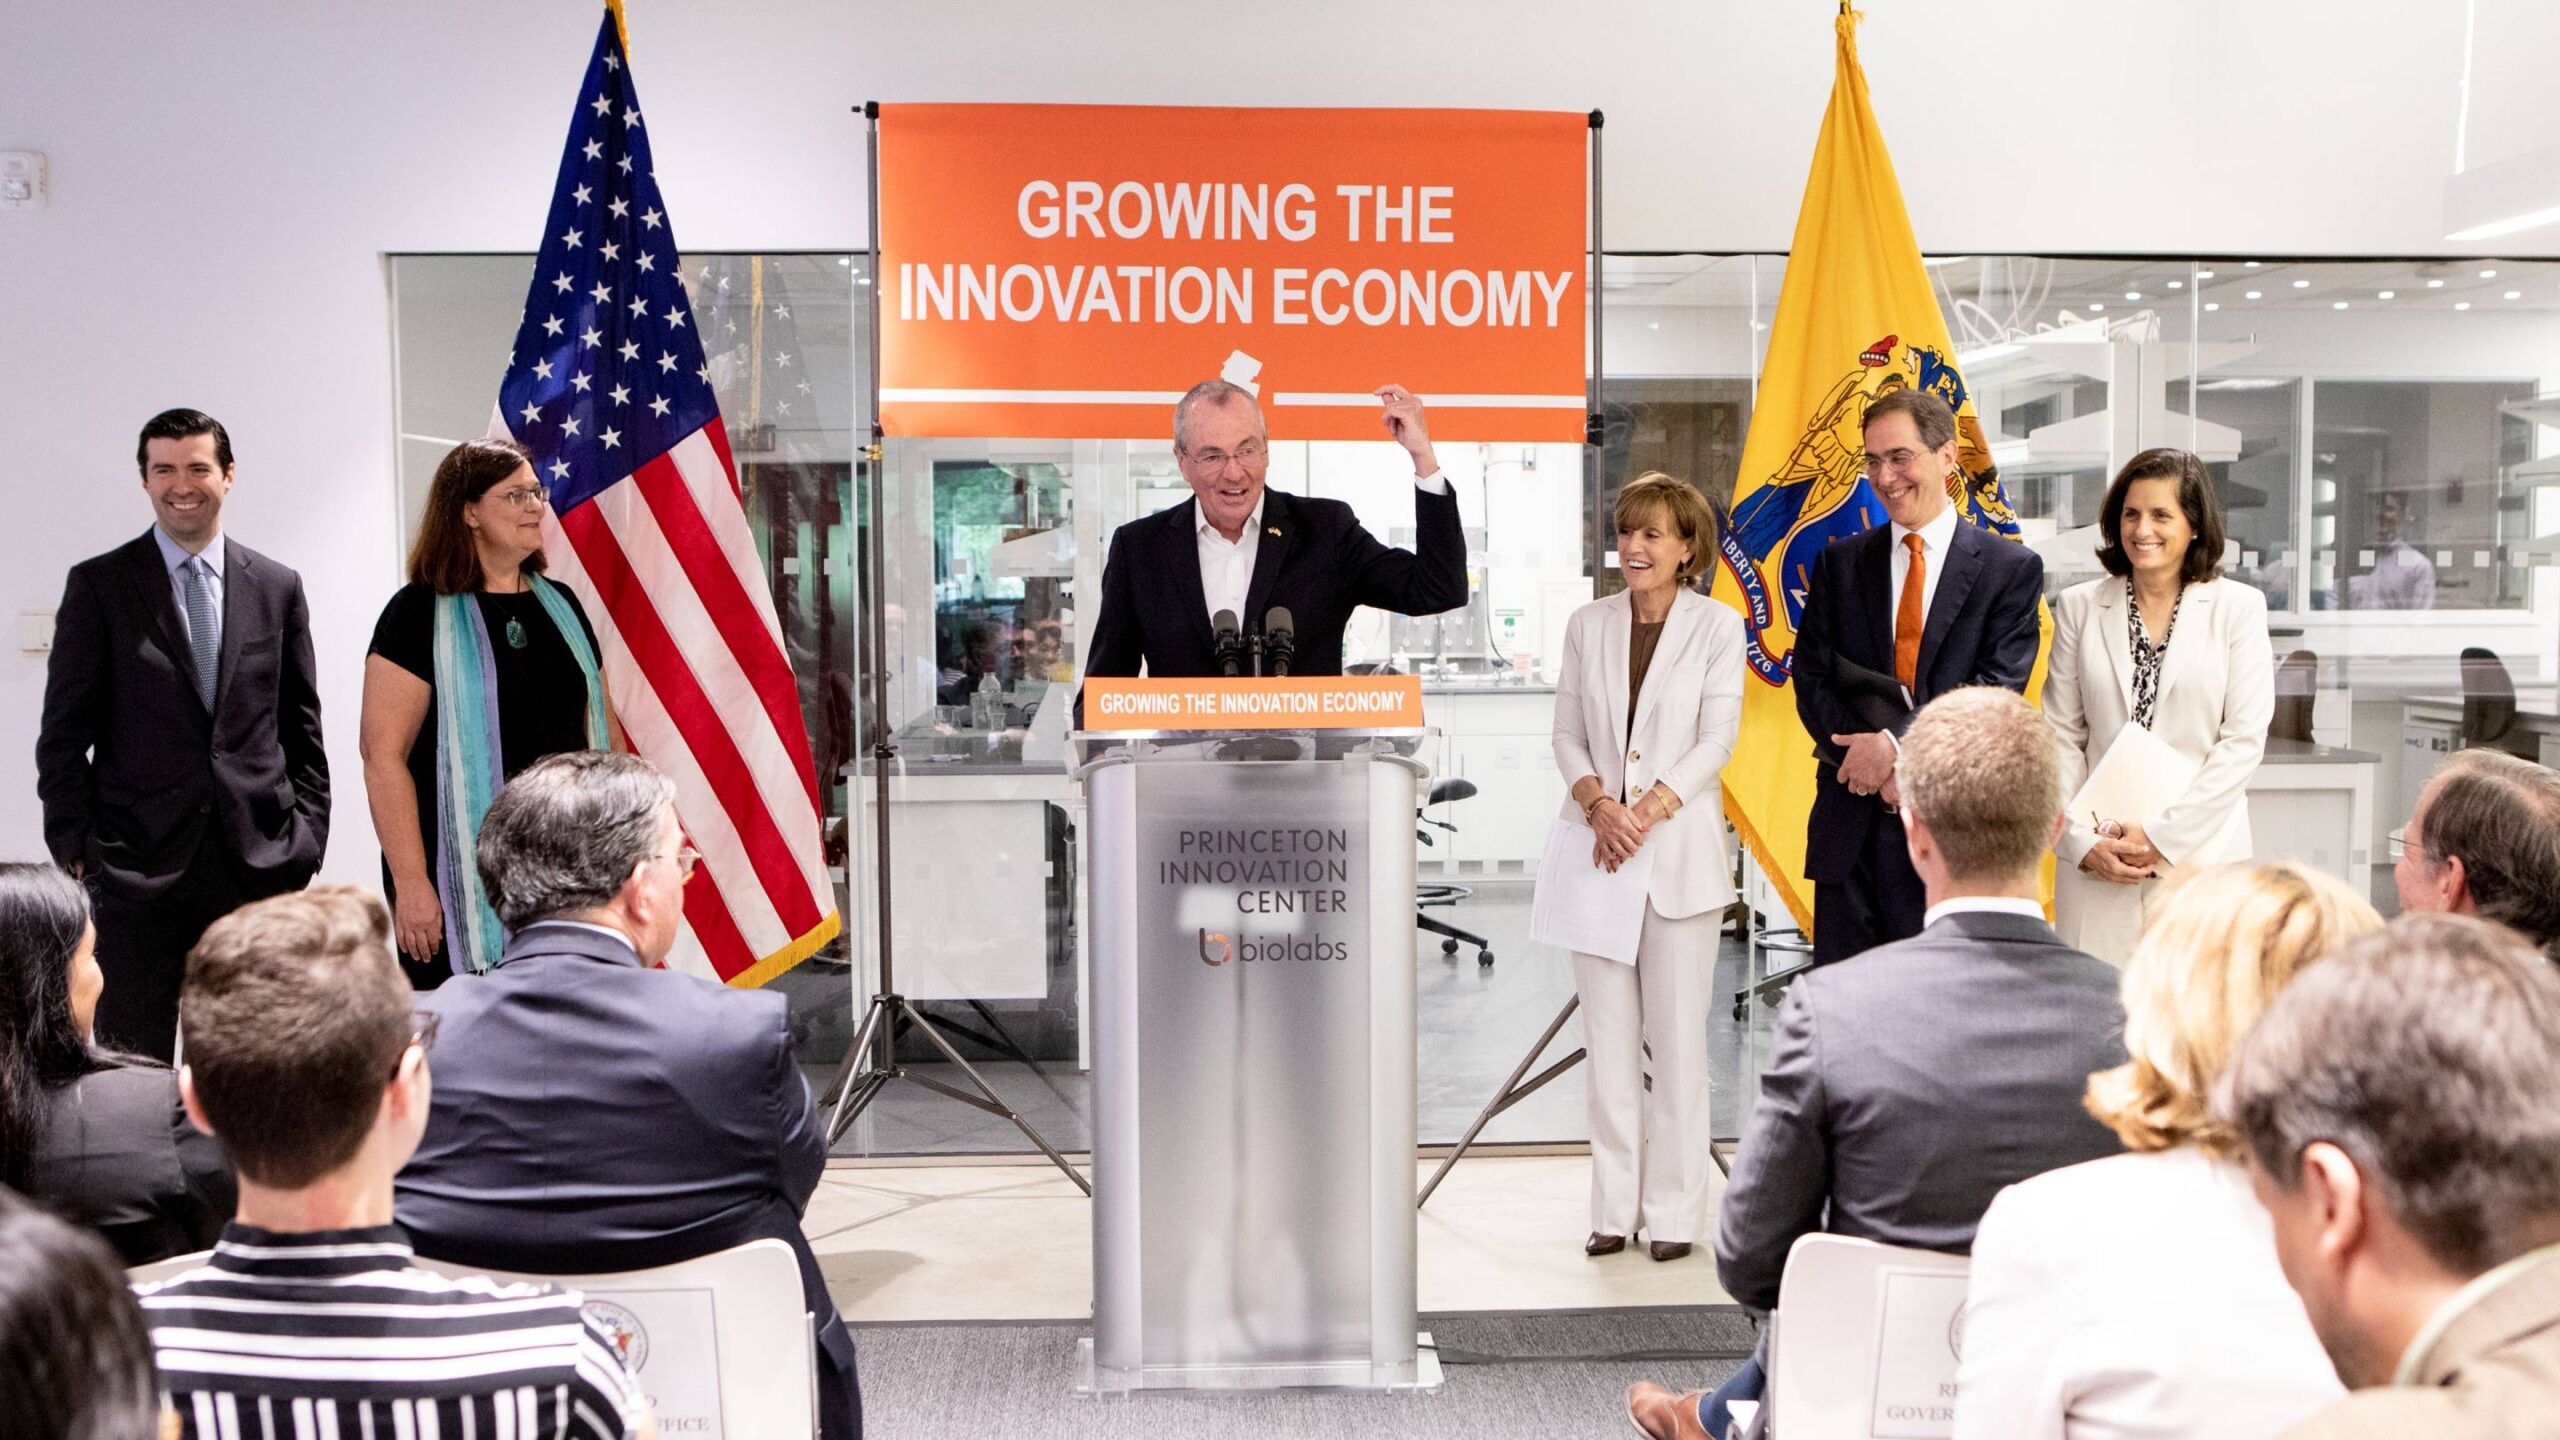 N.J. Gov. Phil Murphy speaks at podium before sign reading "Growing the Innovation Economy."